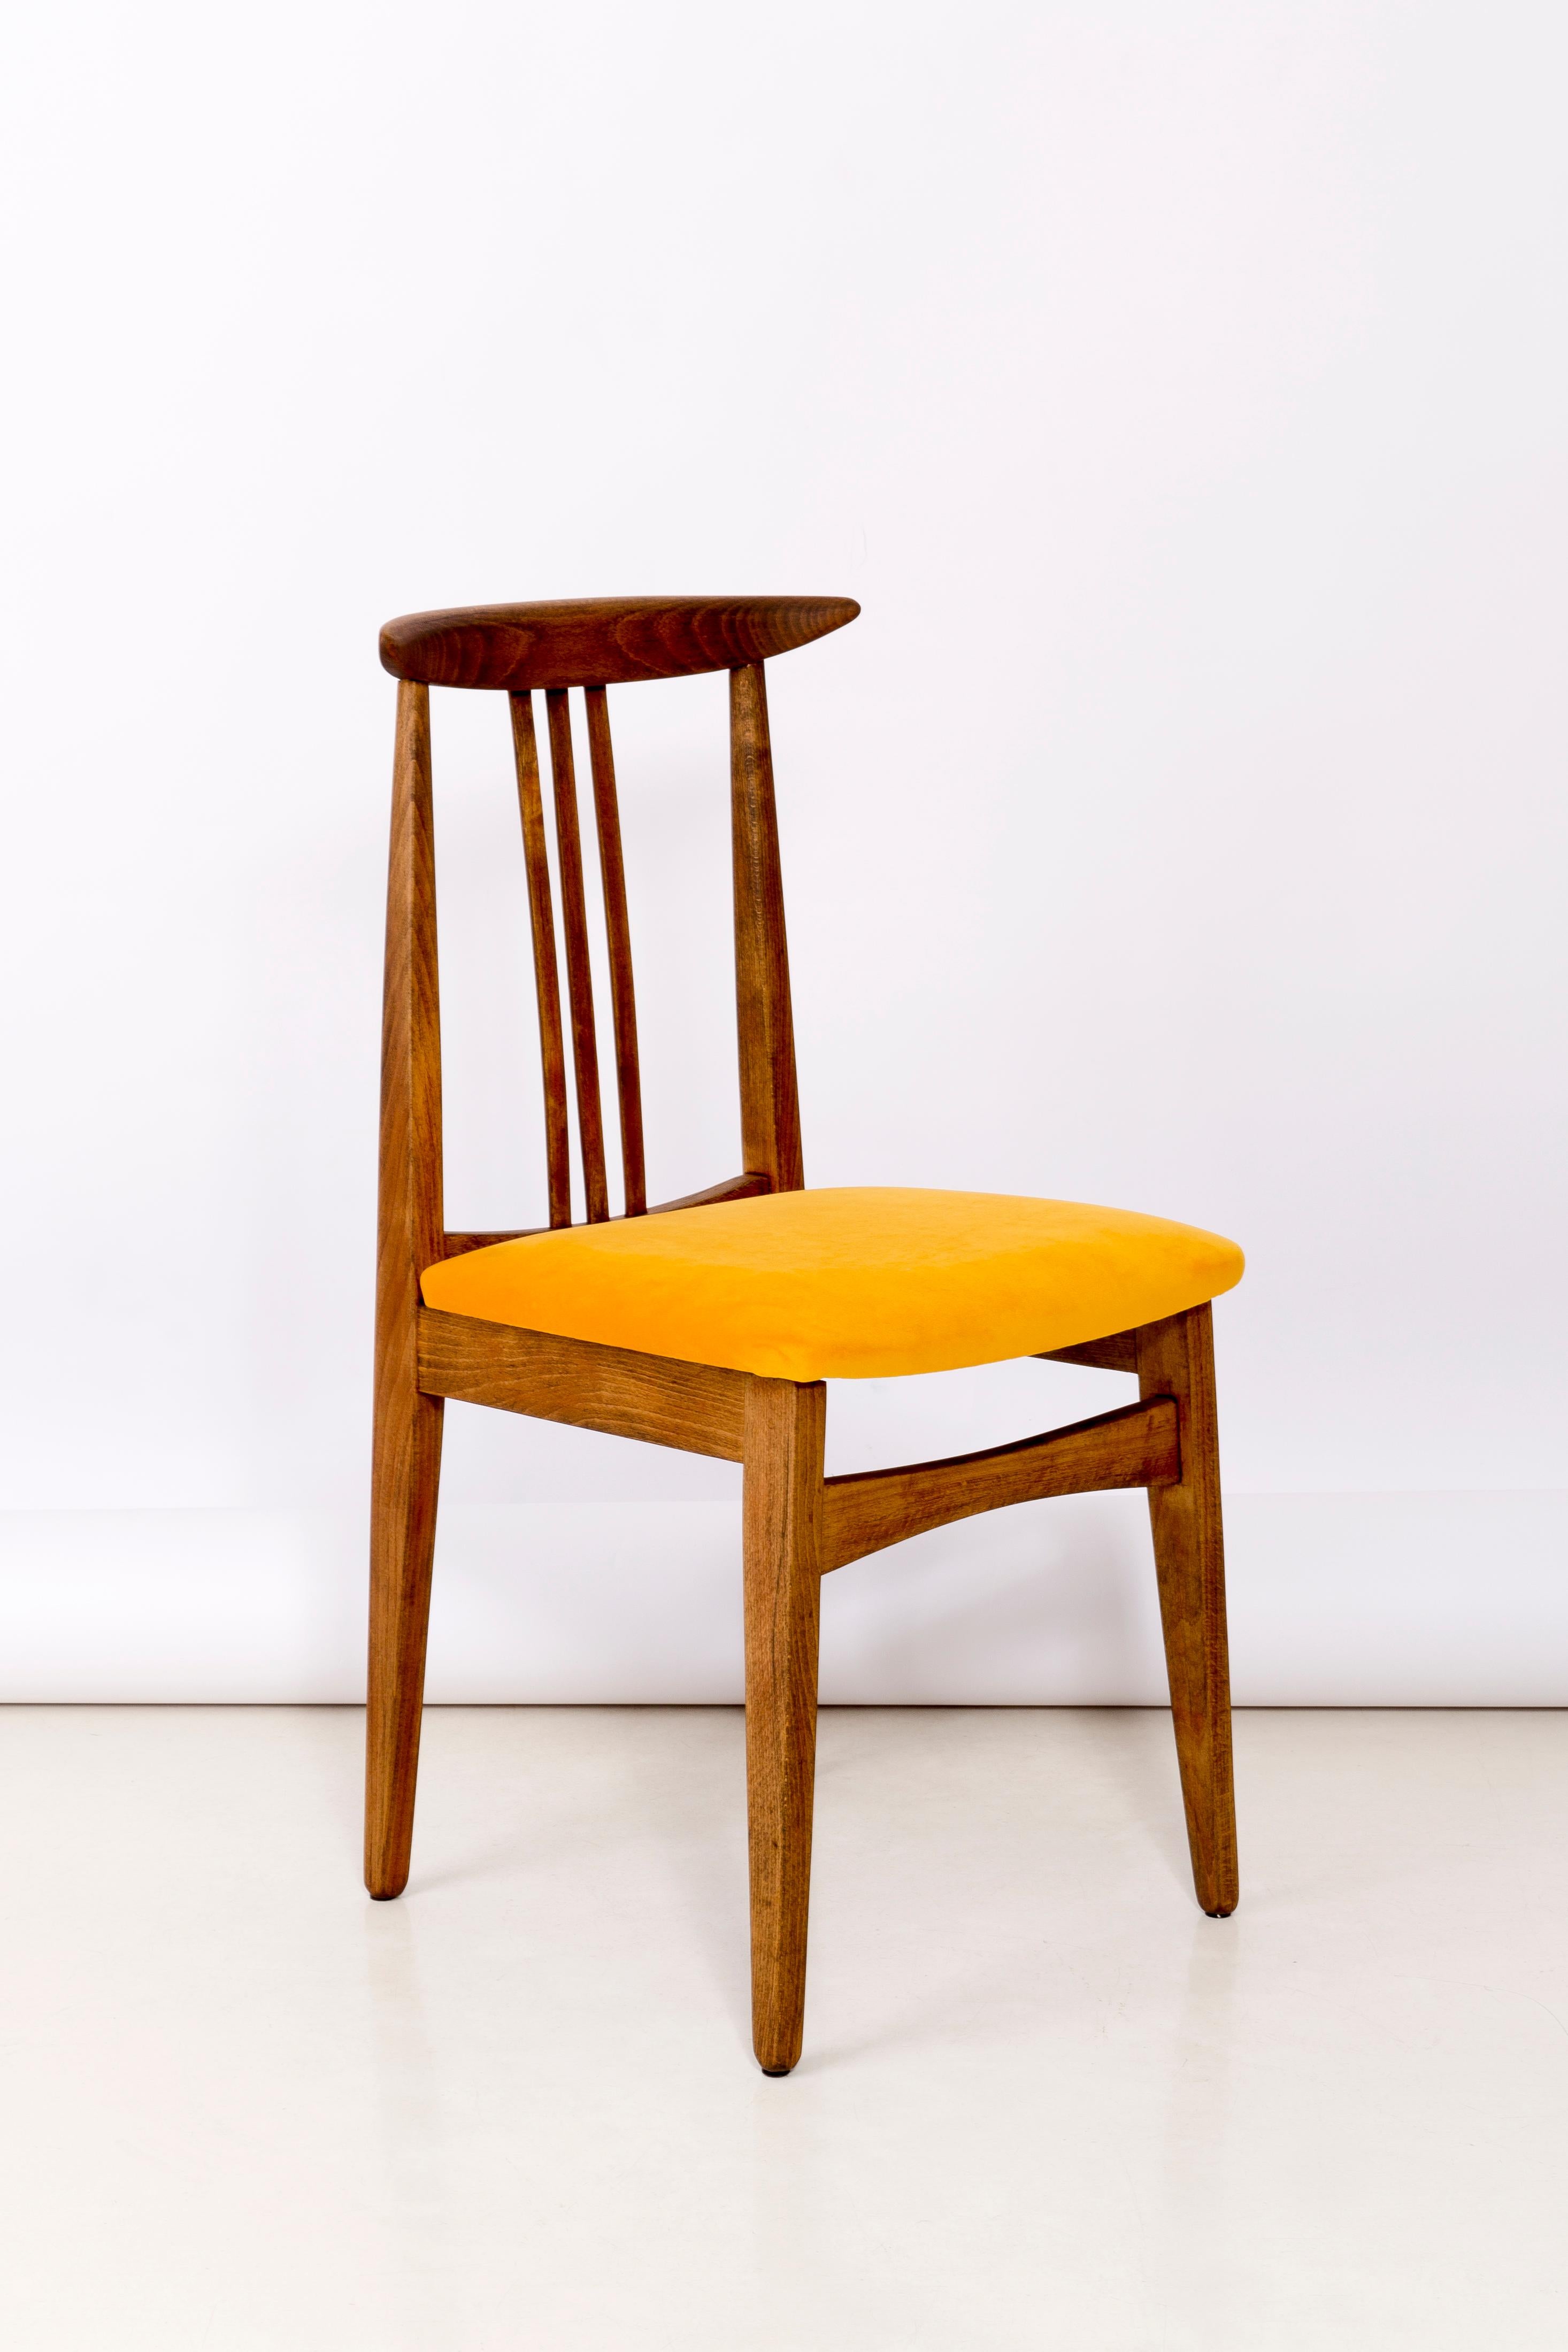 20th Century Set of Eight Yellow Chairs, by Zielinski, Europe, 1960s For Sale